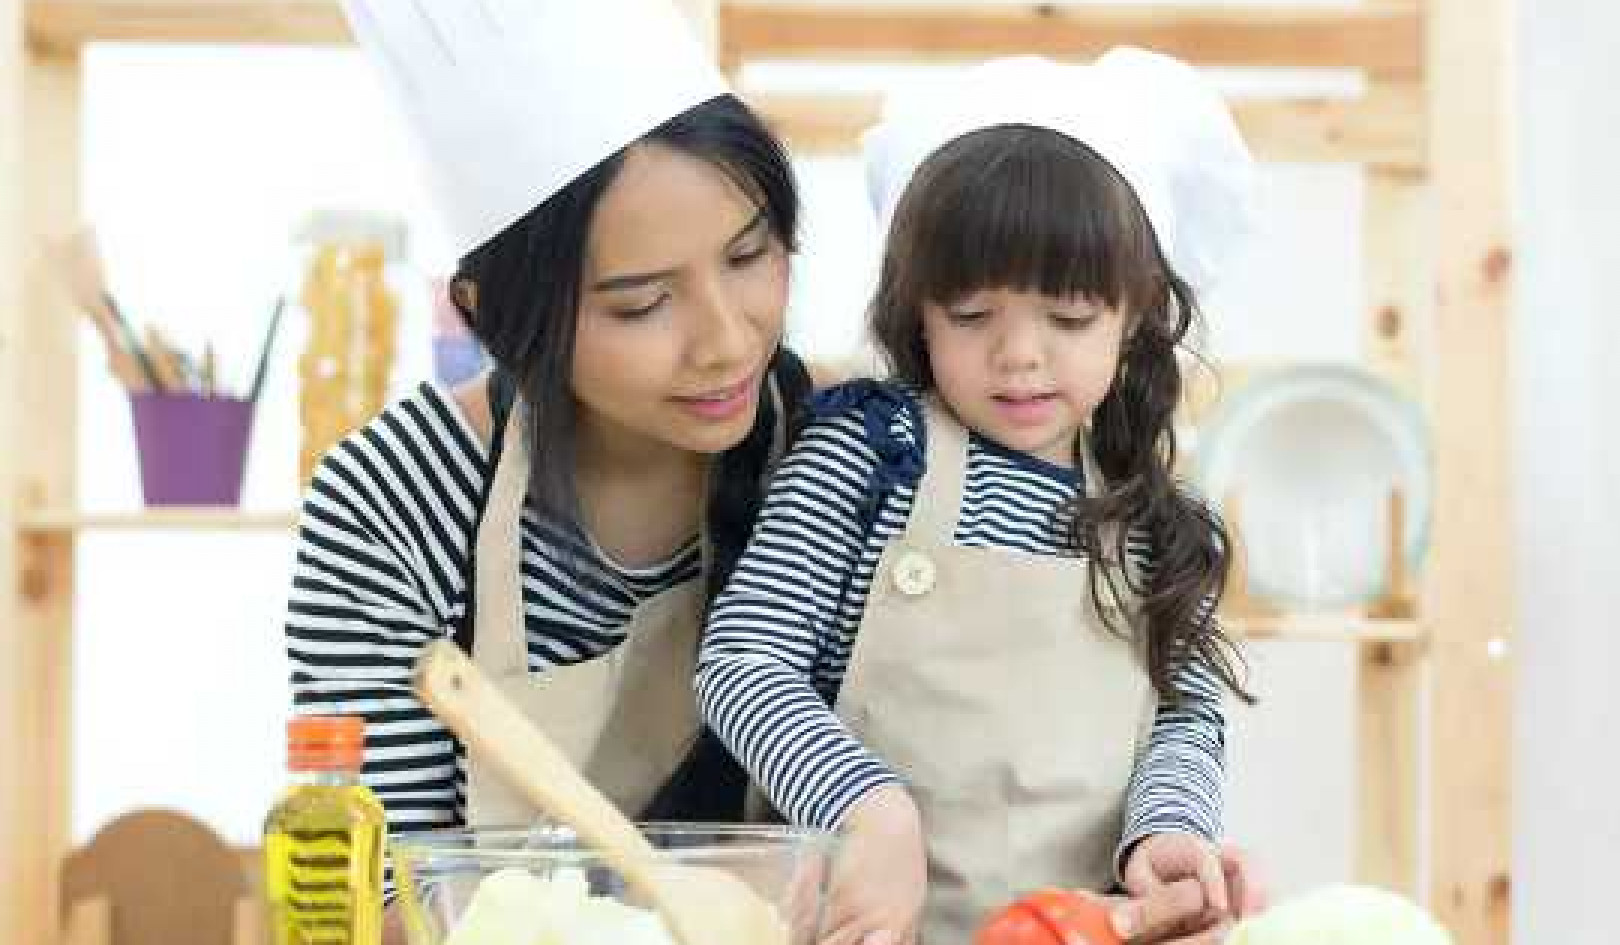 Children As Young As Two Can Learn To Cook – Here Are The Kitchen Skills